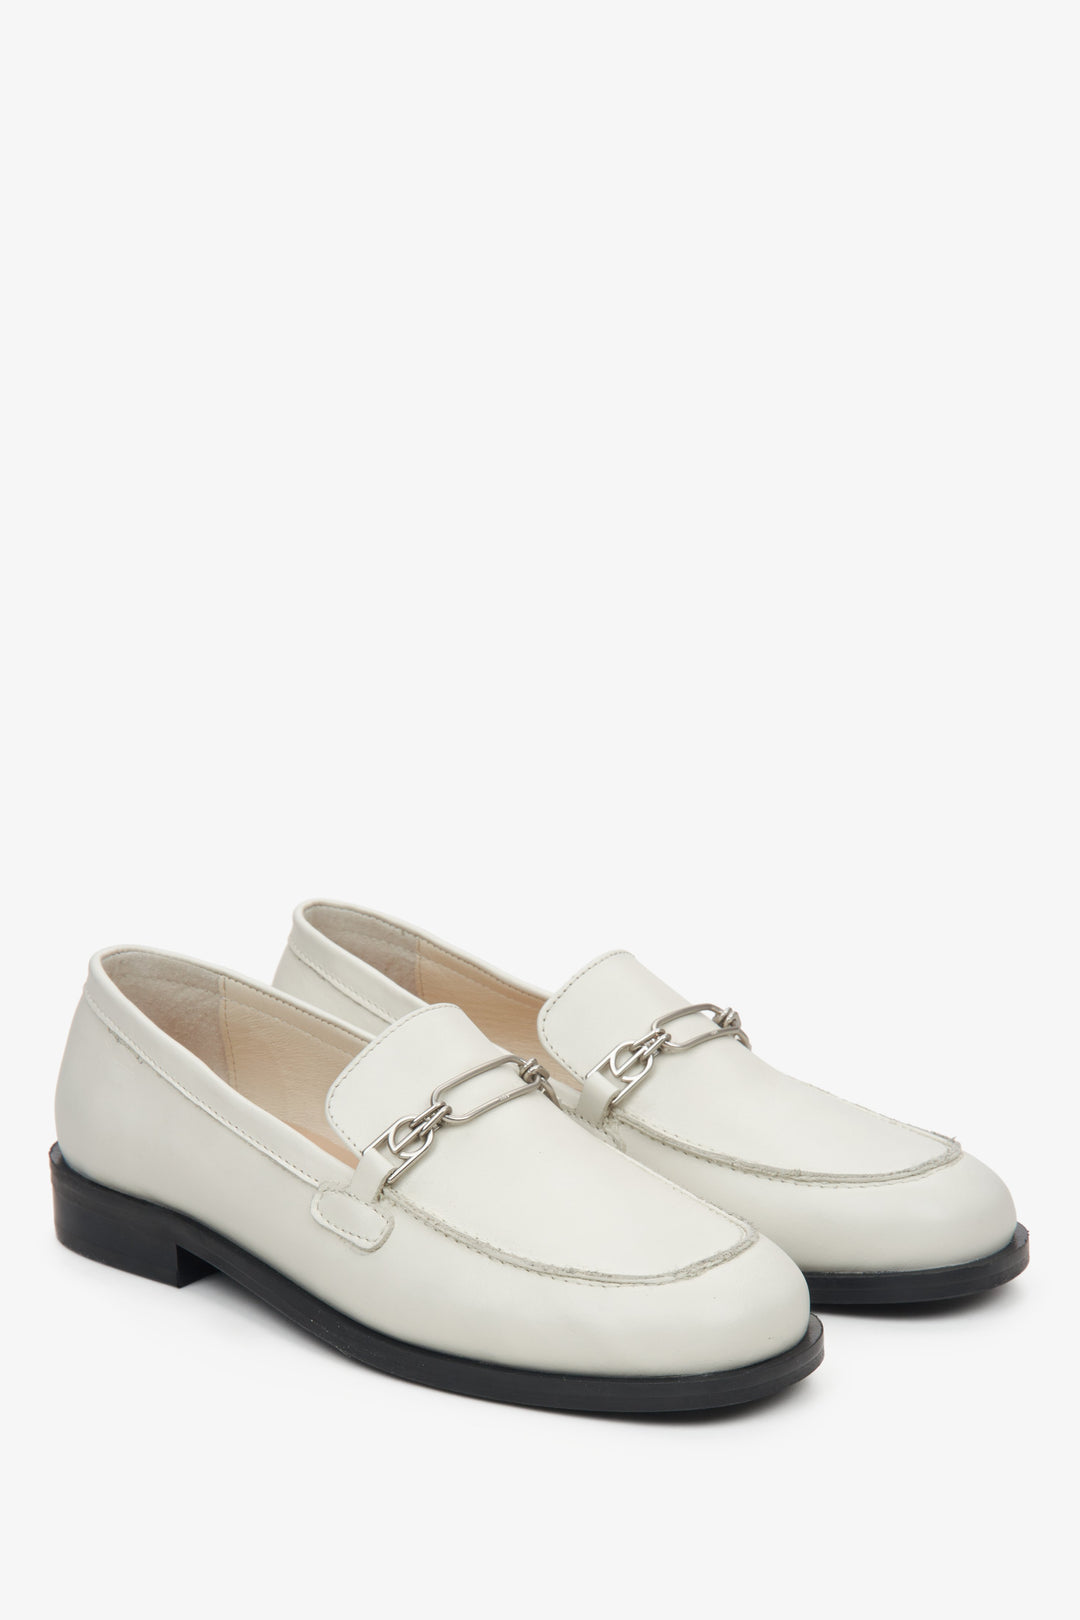 Women's milky and beige  penny loafers Estro.